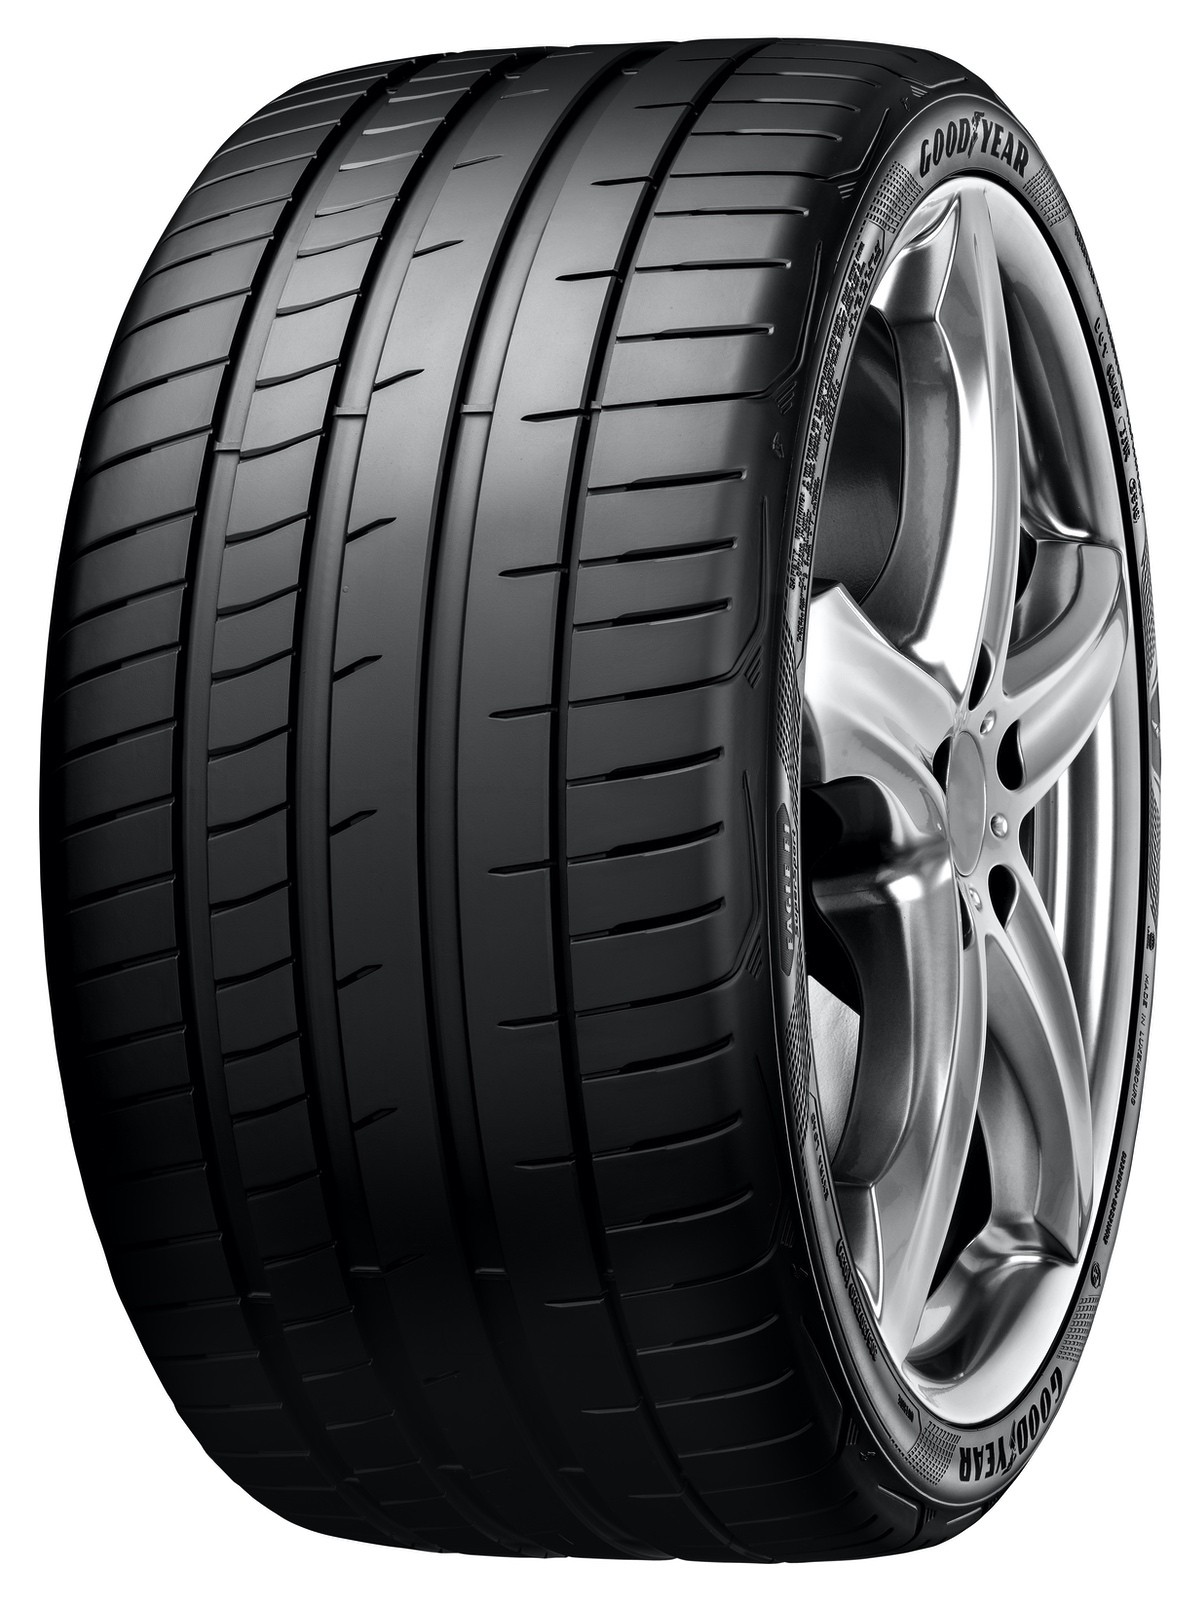 Gomme Nuove Goodyear 315/30 R21 105Y Eagle F1 SuperSport FP XL pneumatici nuovi Estivo